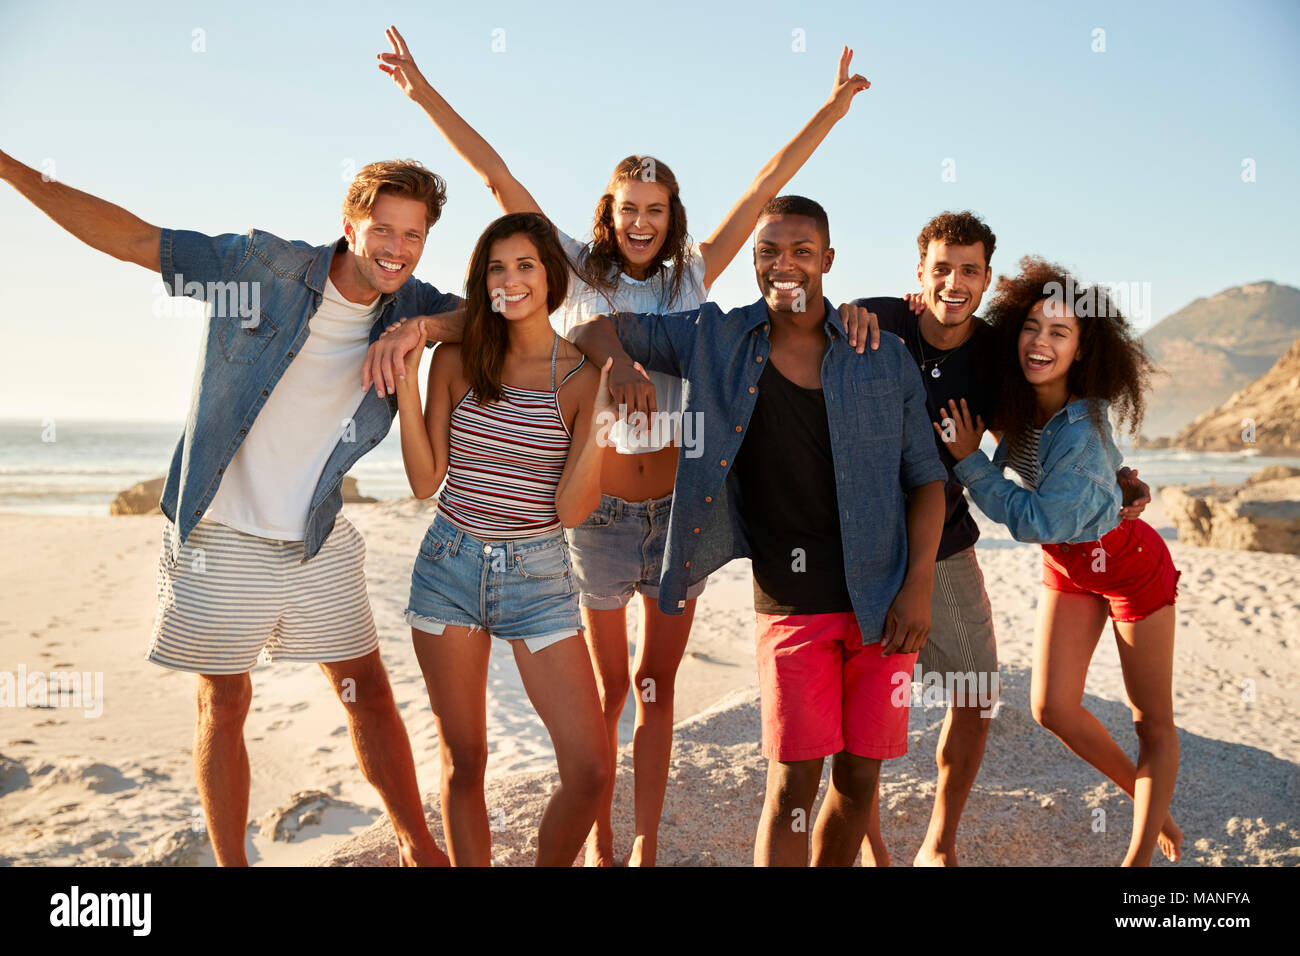 Portrait of Friends having fun Together On Beach Vacation Banque D'Images